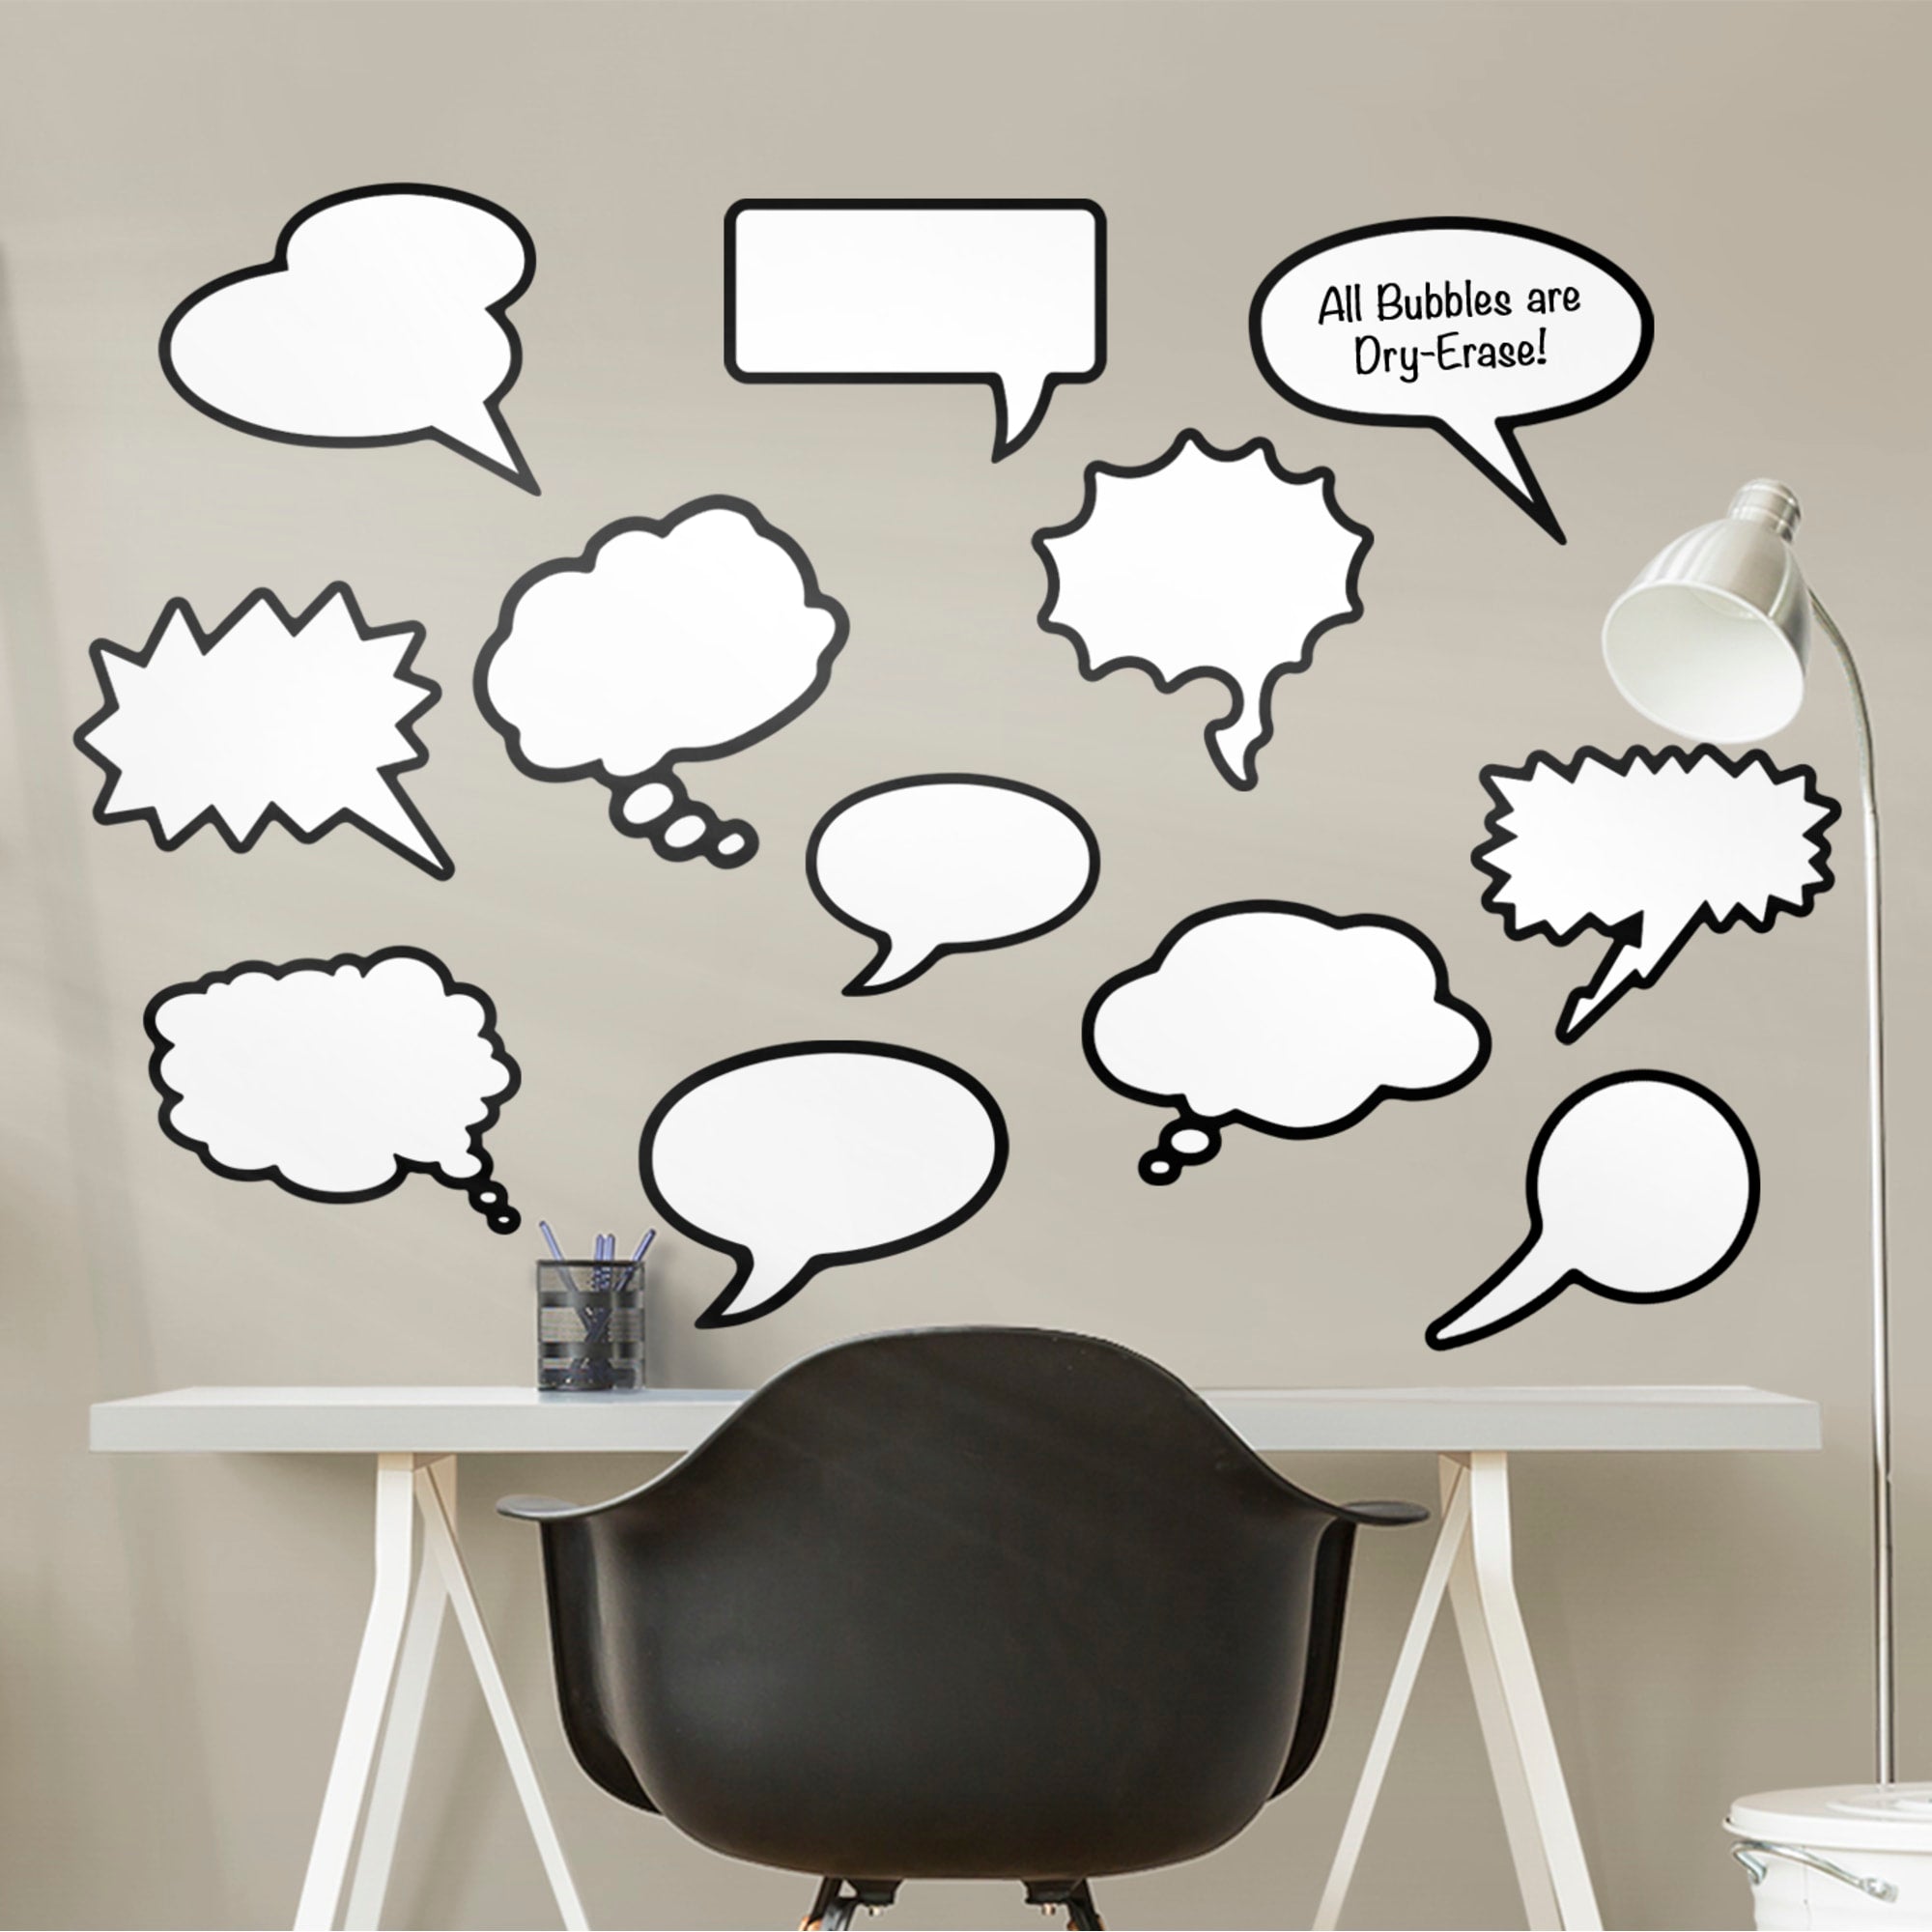 Fathead Dry Erase Whiteboard - Huge Removable Wall Decal